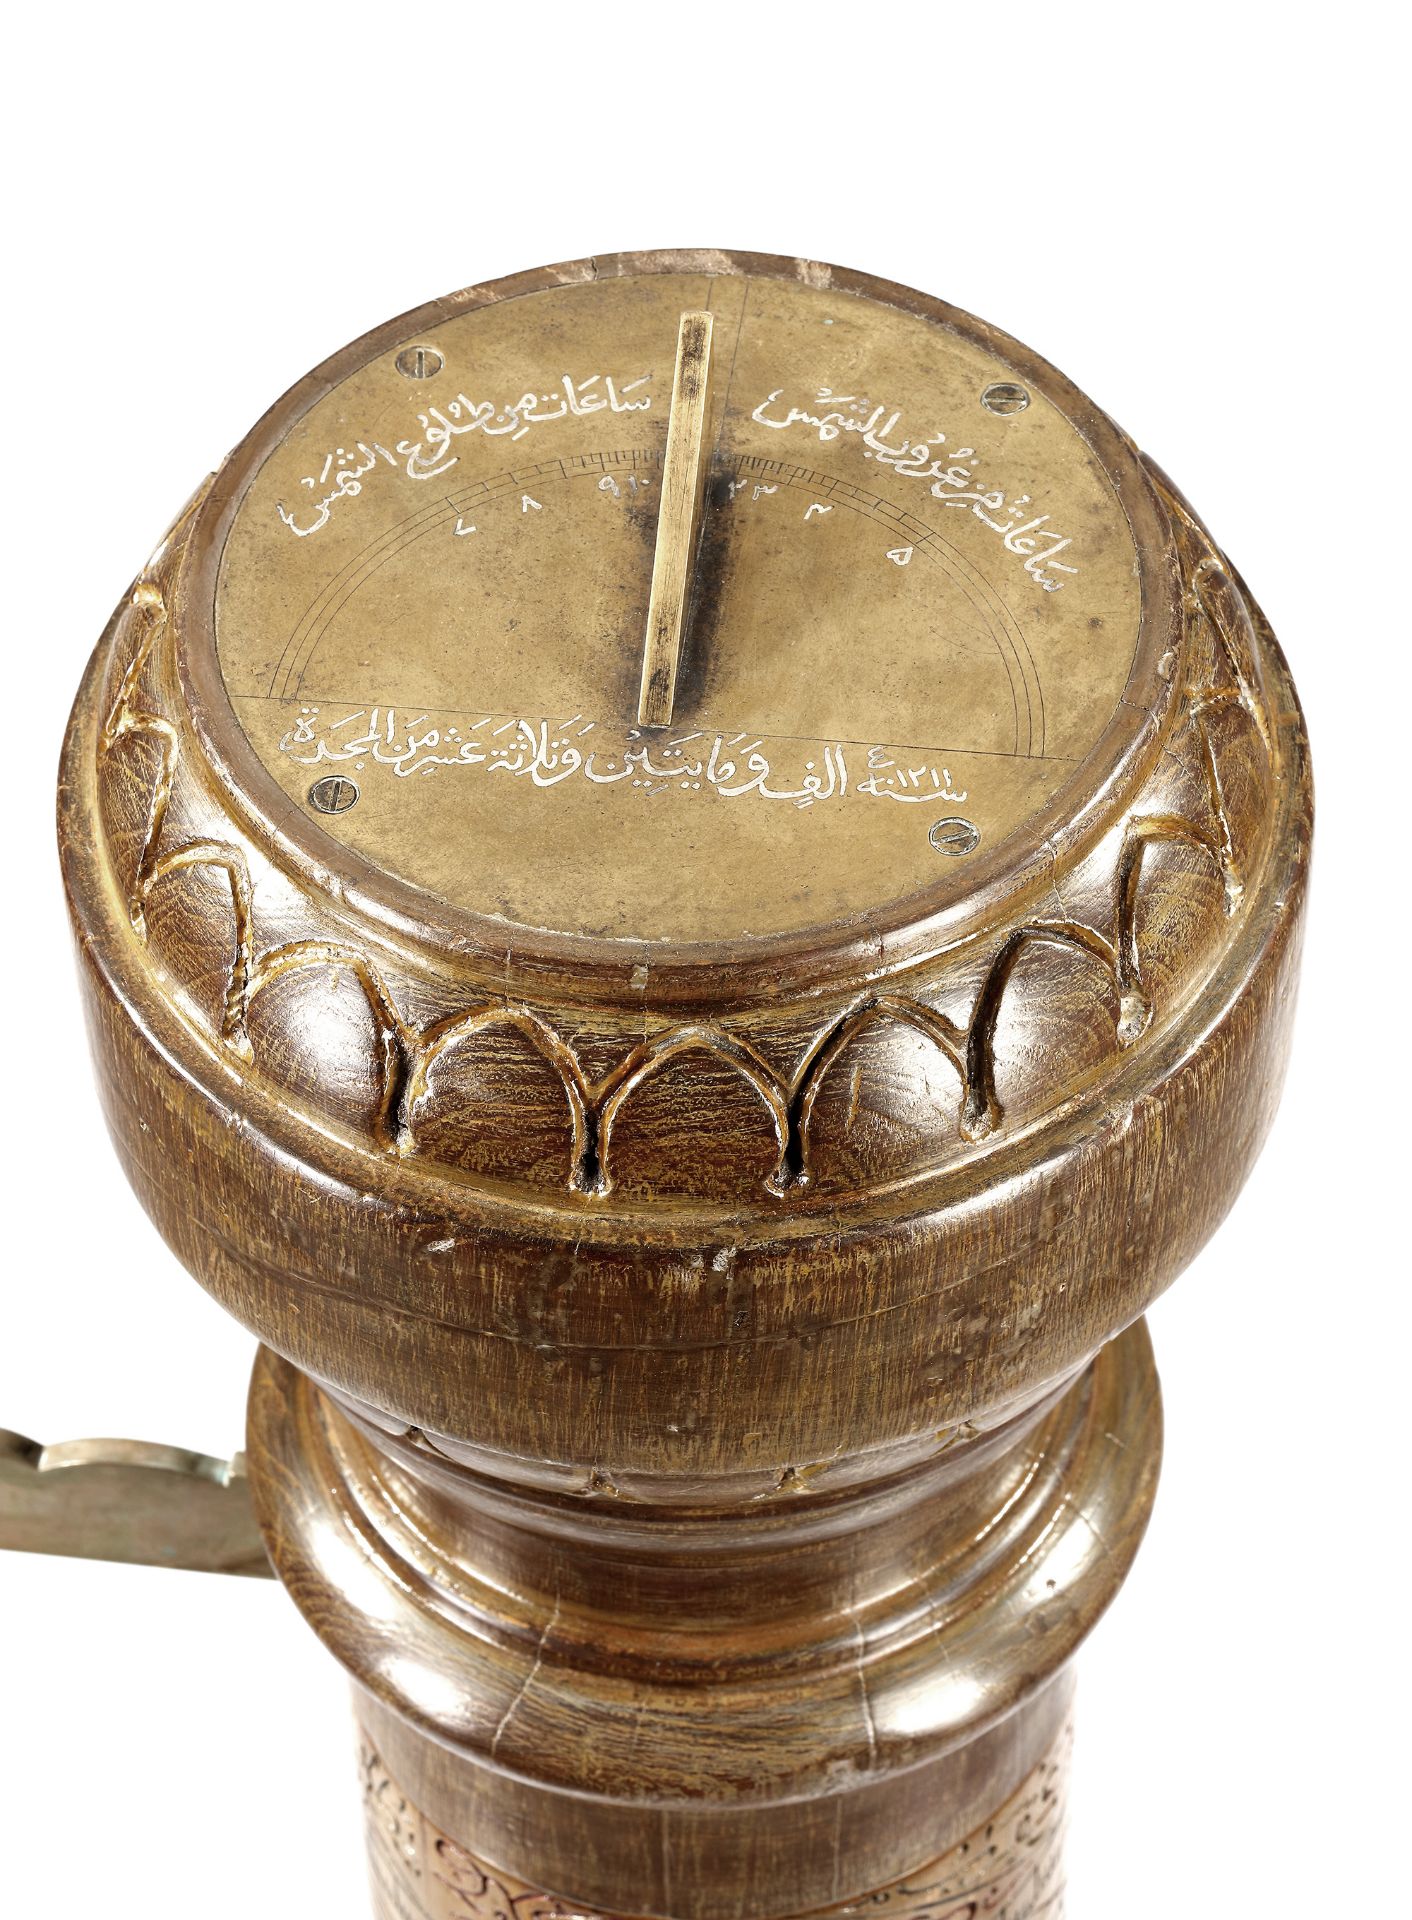 AN EXCEPTIONALLY RARE AND MONUMENTAL OTTOMAN SUNDIAL SENT AS GIFT TO MEDINA, PROBABLY BY SULTAN ABDU - Image 2 of 7